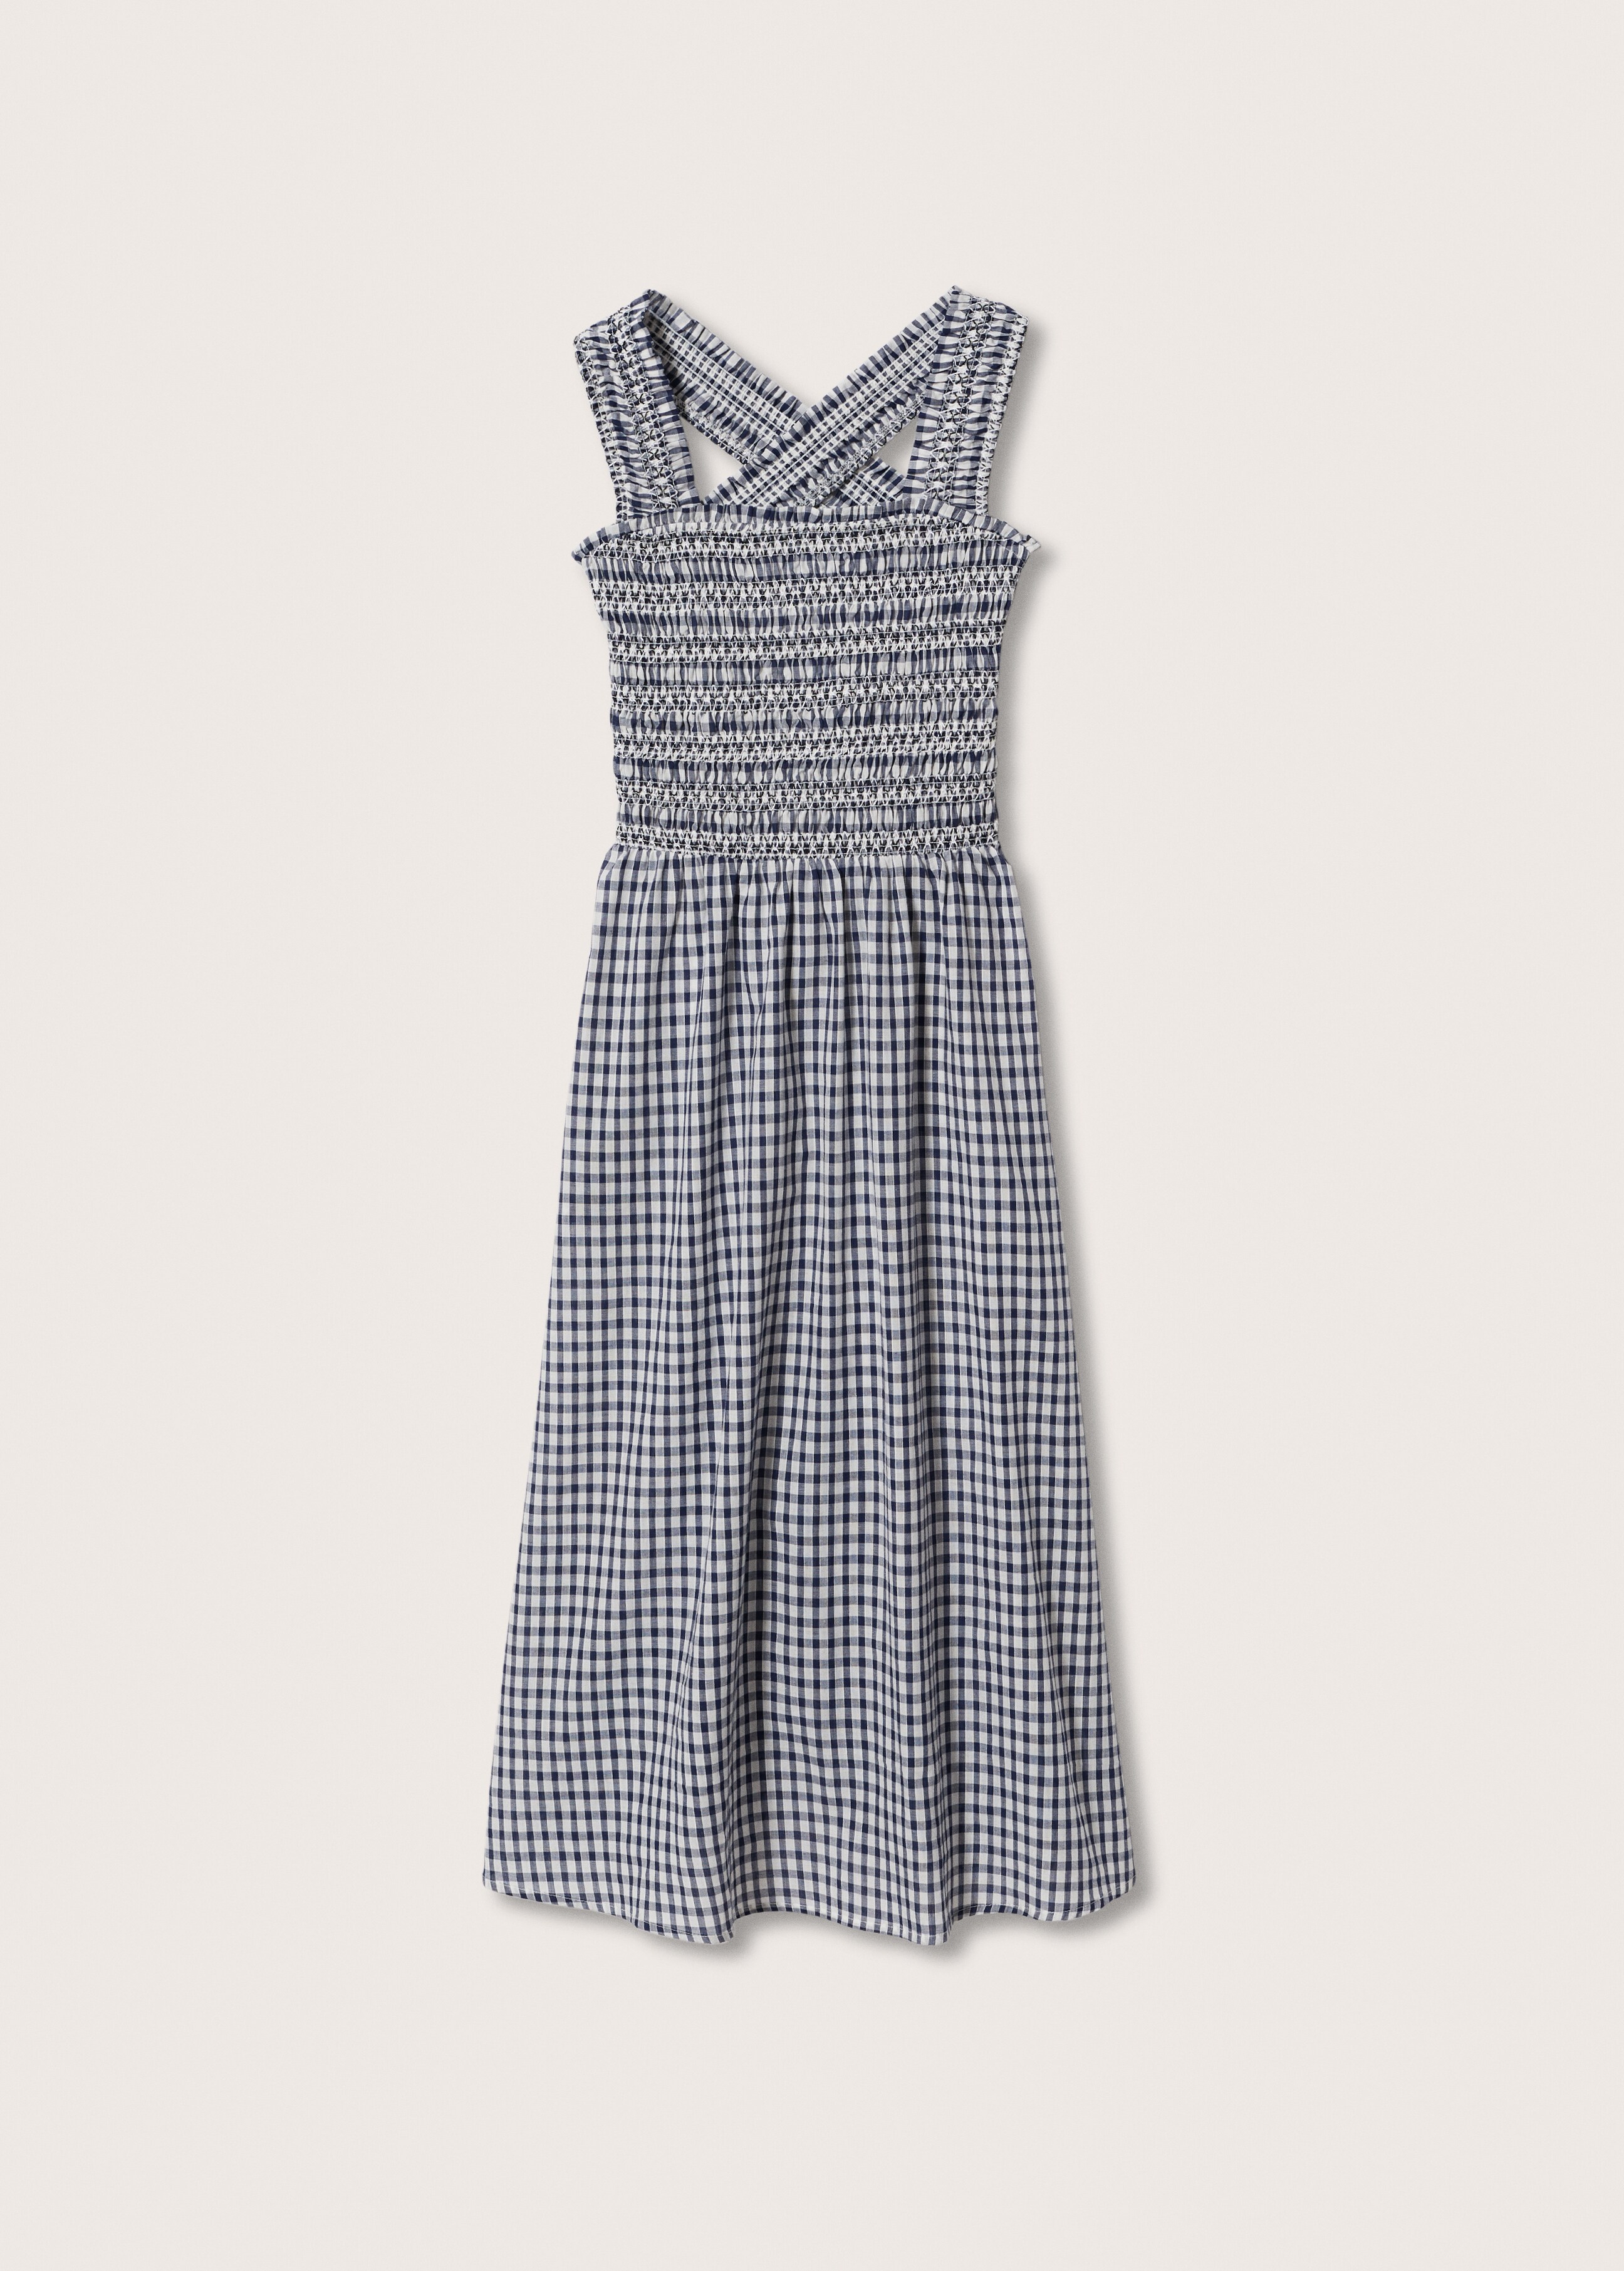 Gingham check cottoned dress - Article without model